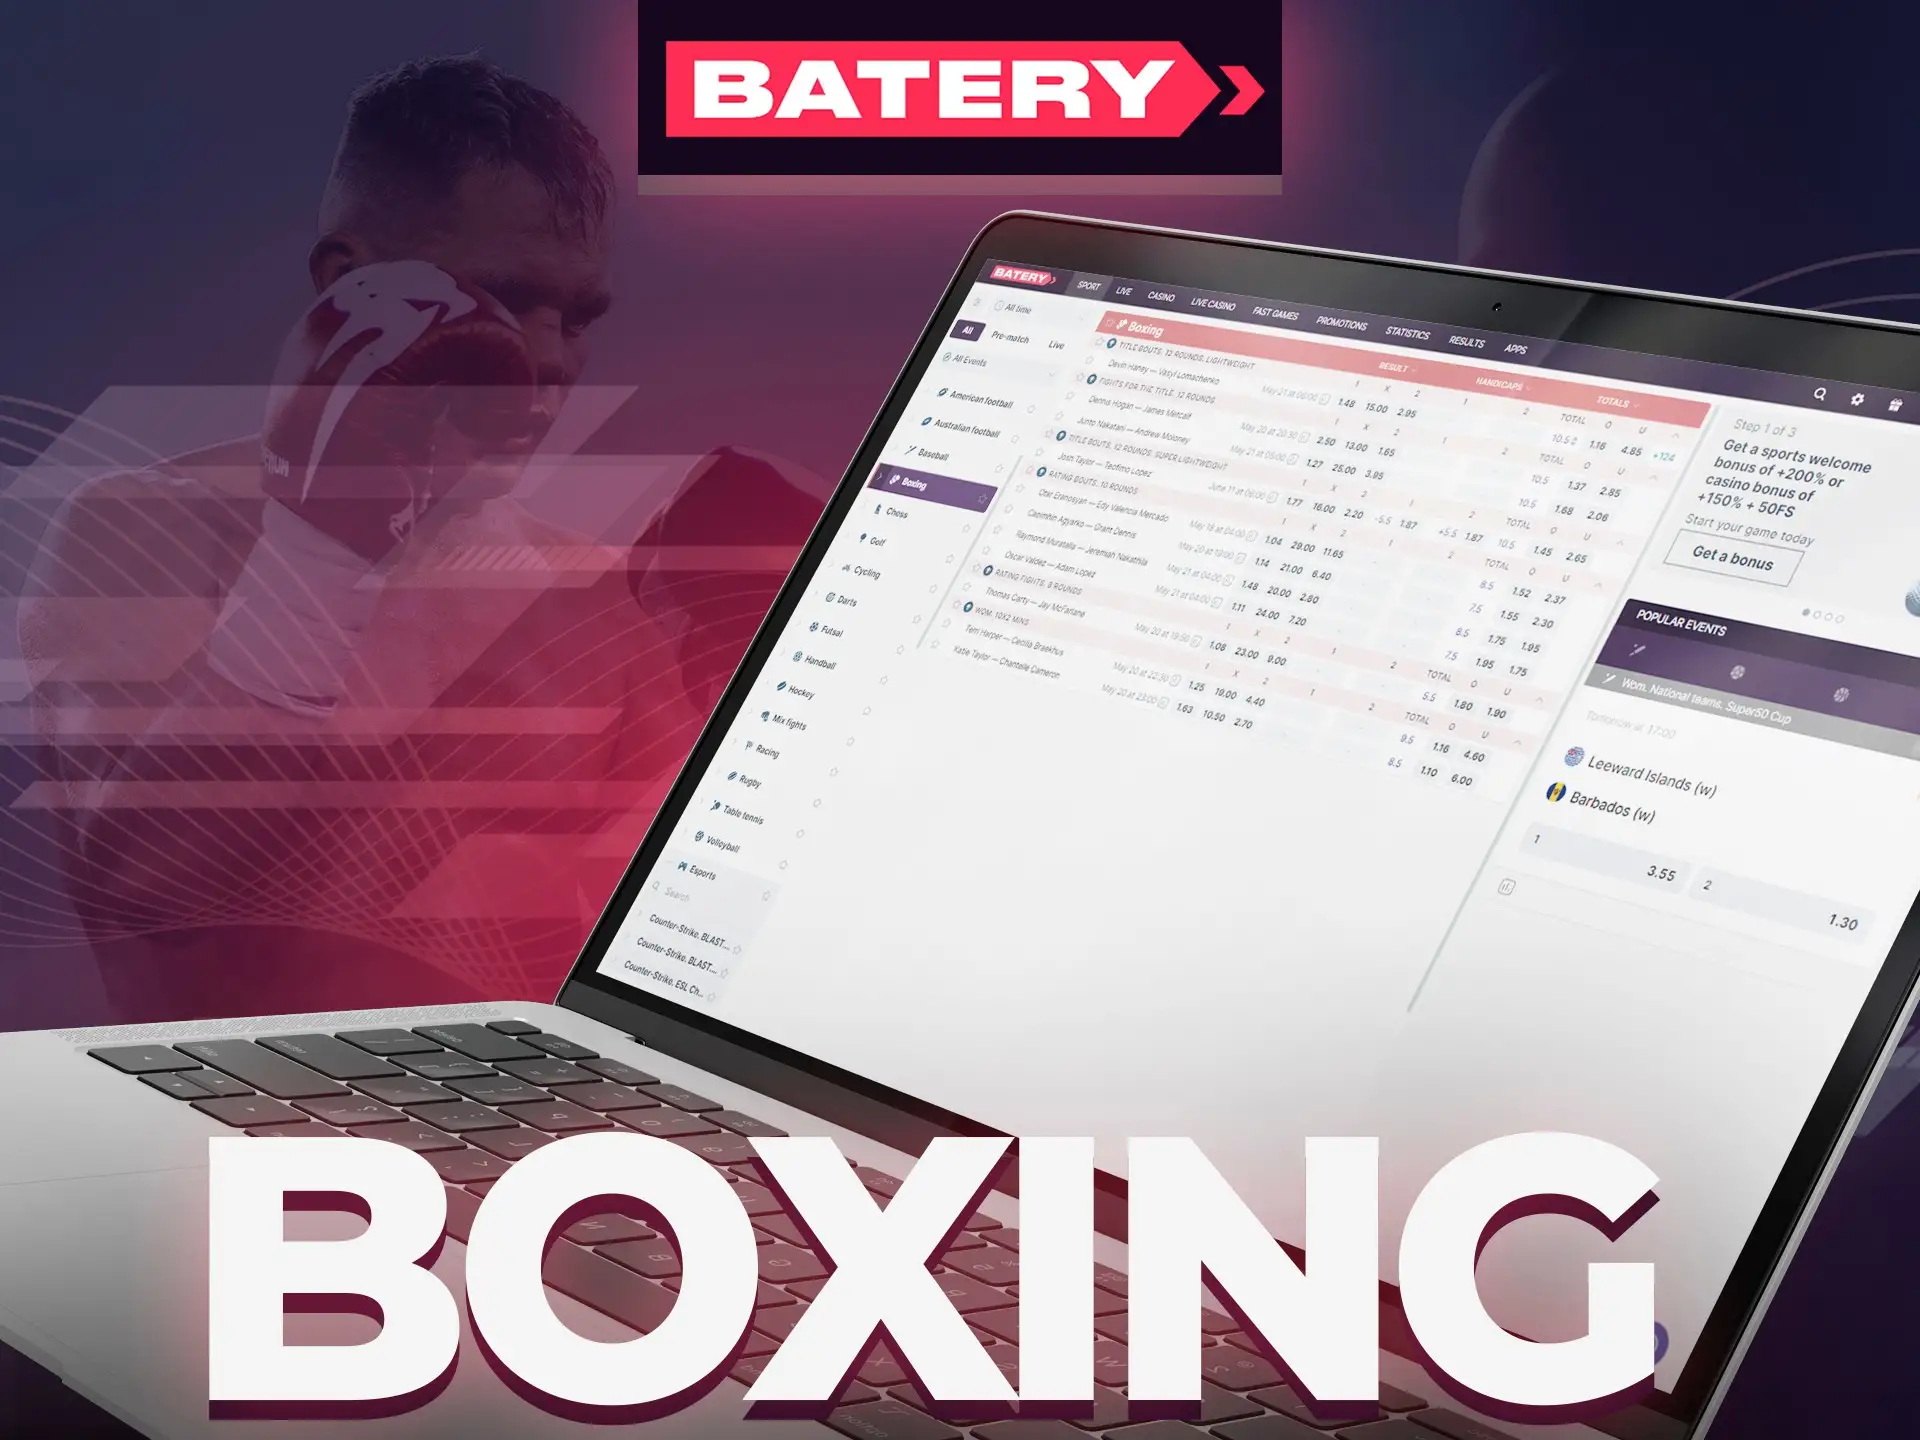 Get your winnings by betting on most profitable boxing fighter at Batery.